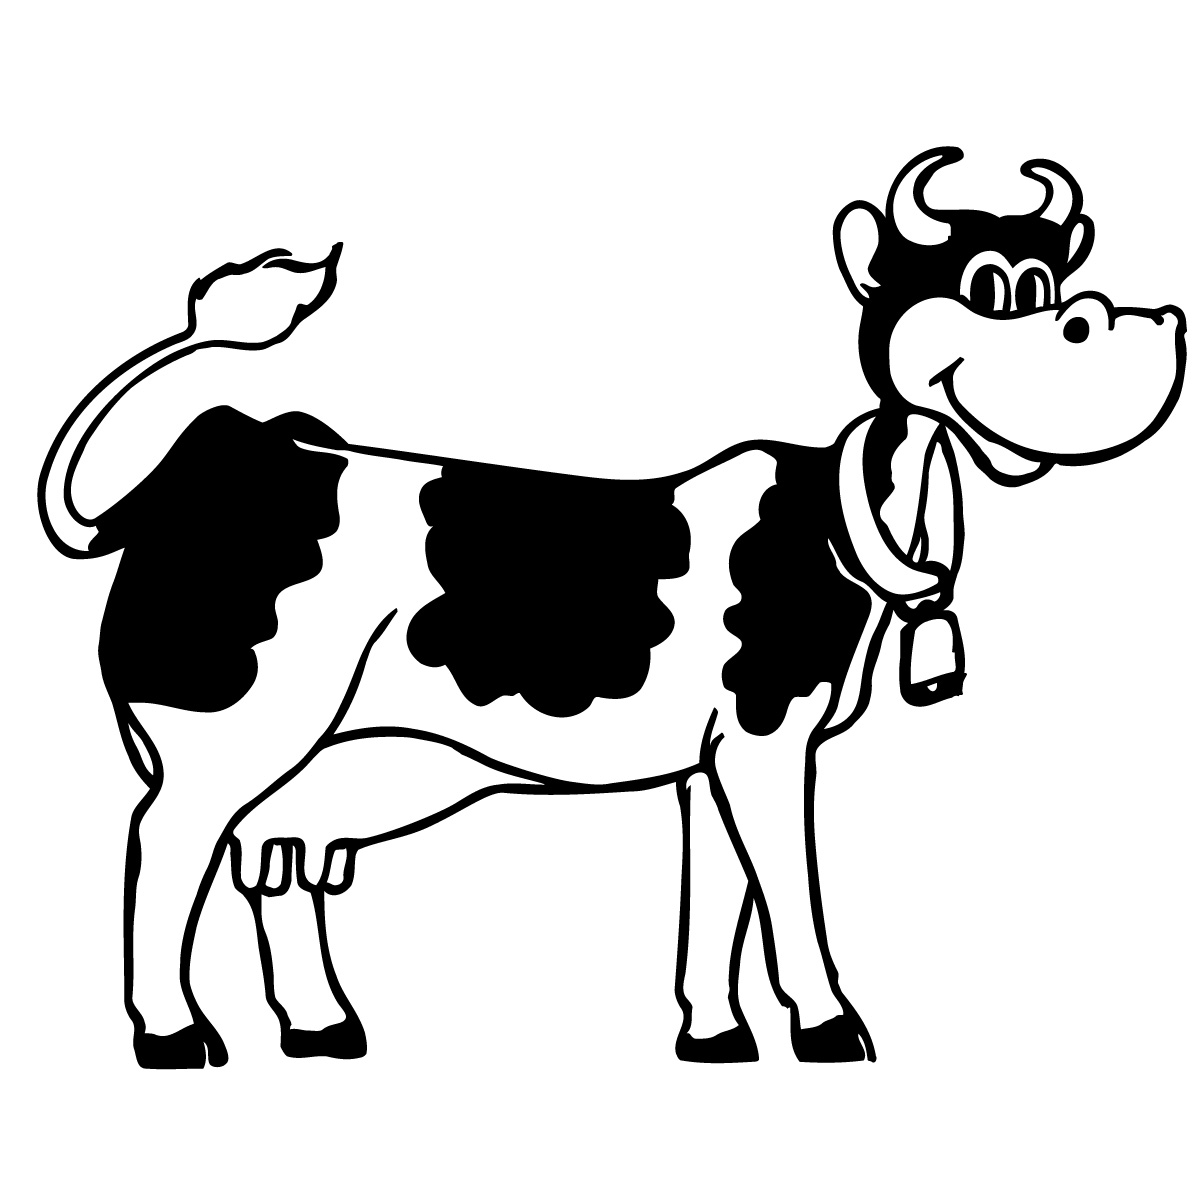 Cute Cow Drawings - ClipArt Best - ClipArt Best